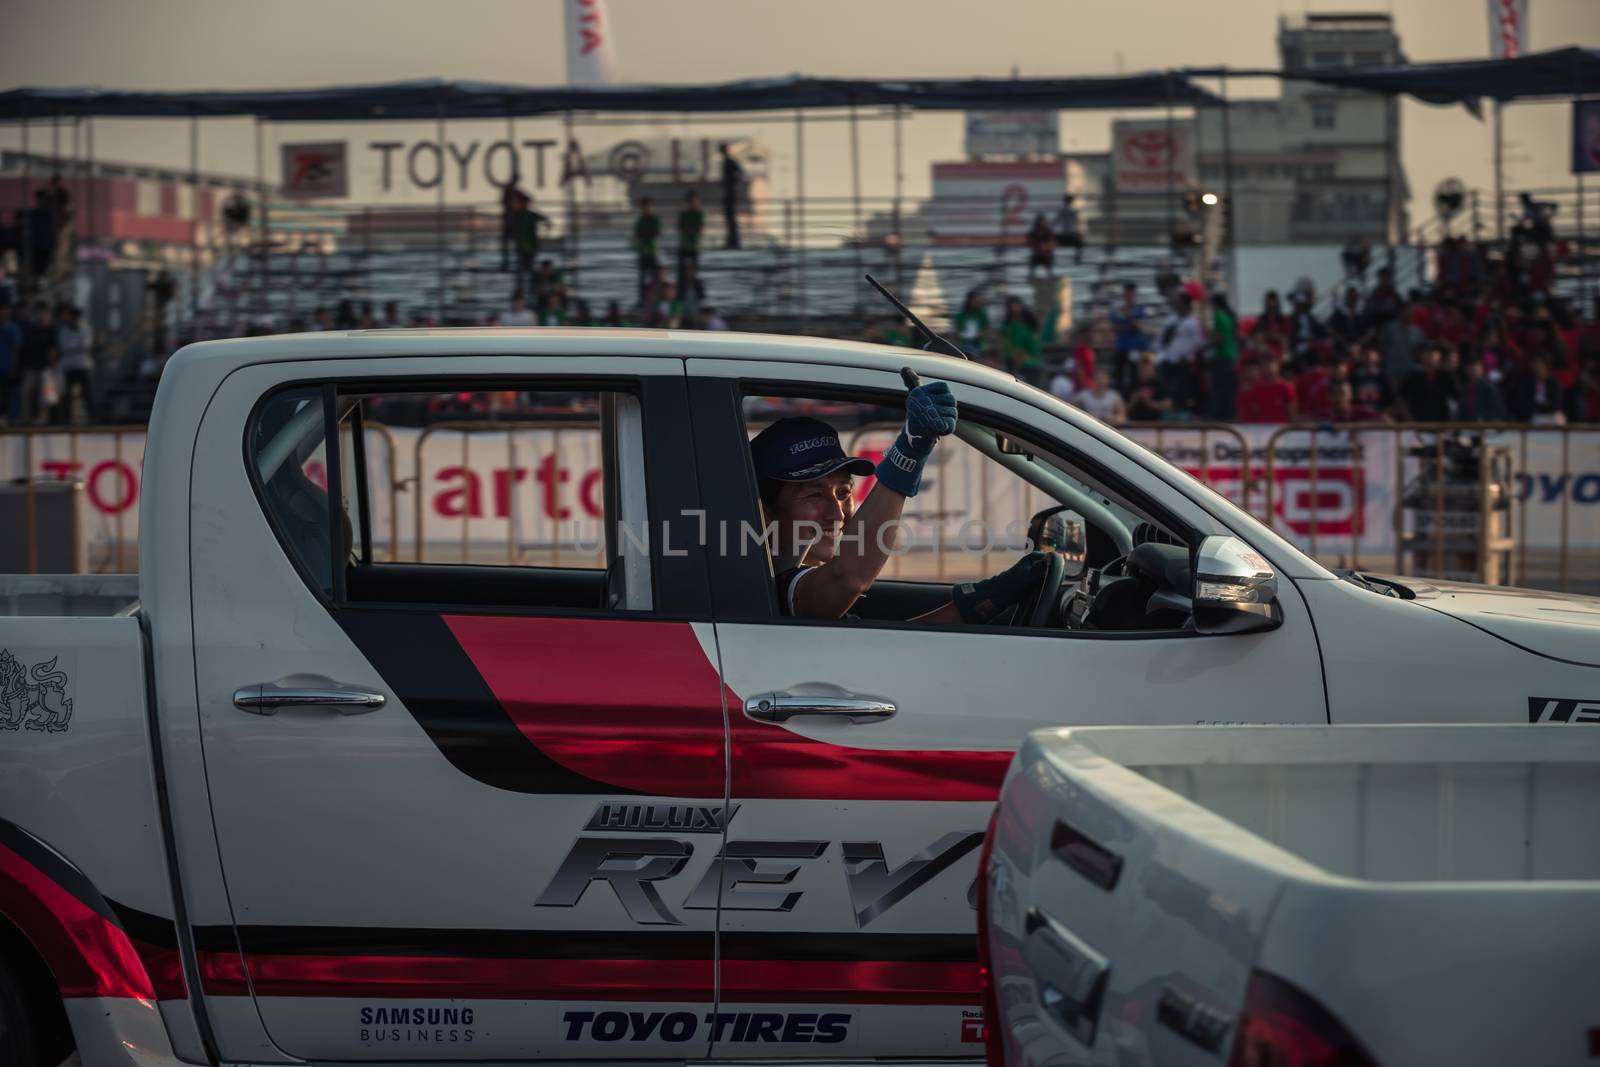 Udon Thani, Thailand - October 18, 2015: Masato Kawabata Japanese driver of the Toyota Hilux Revo thumb up to the audiences after drifting contest on the track between driver from Thailand and Japan at the event Toyota Motor Sport show at Udon Thani, Thailand